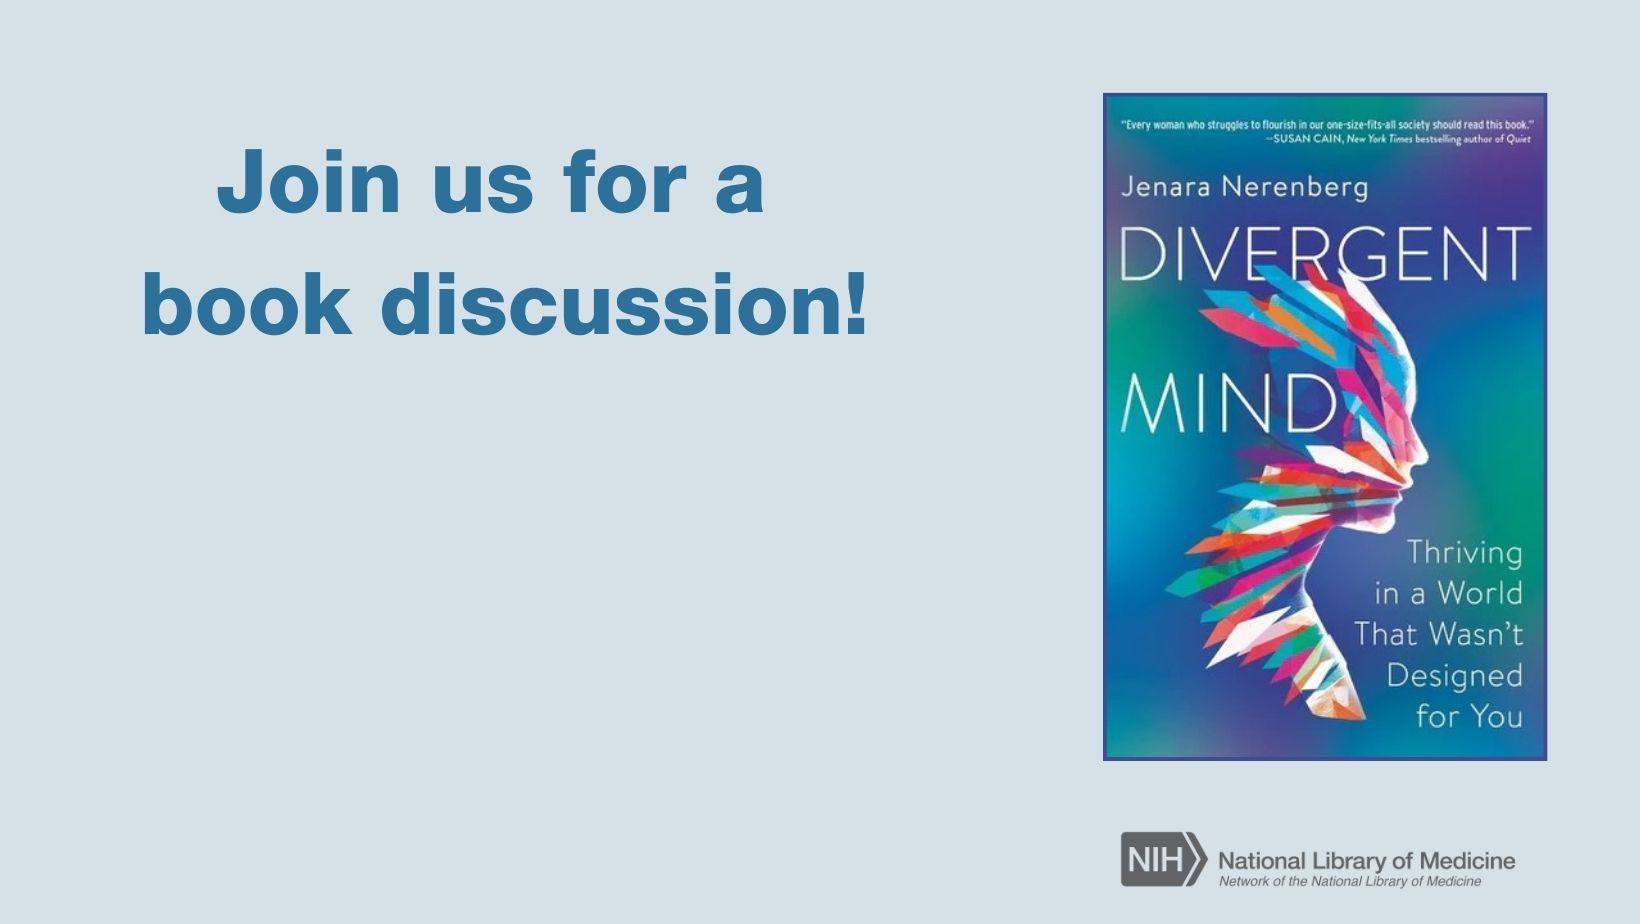 Join us for a book discussion for Divergent Mind